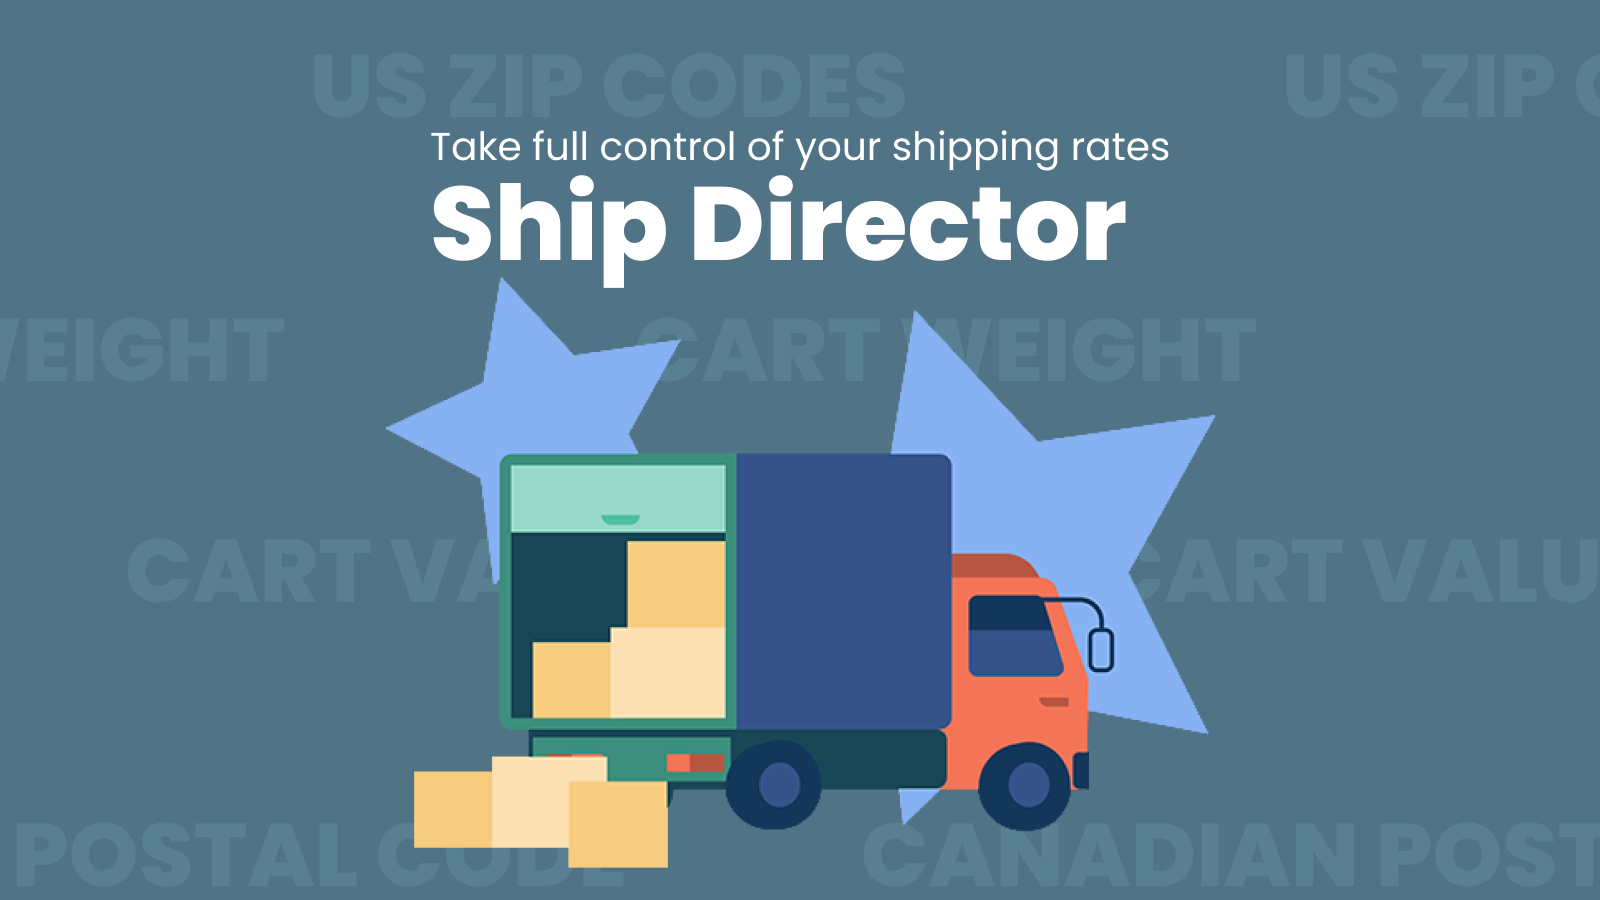 Take control of your shipping rates with Ship Director